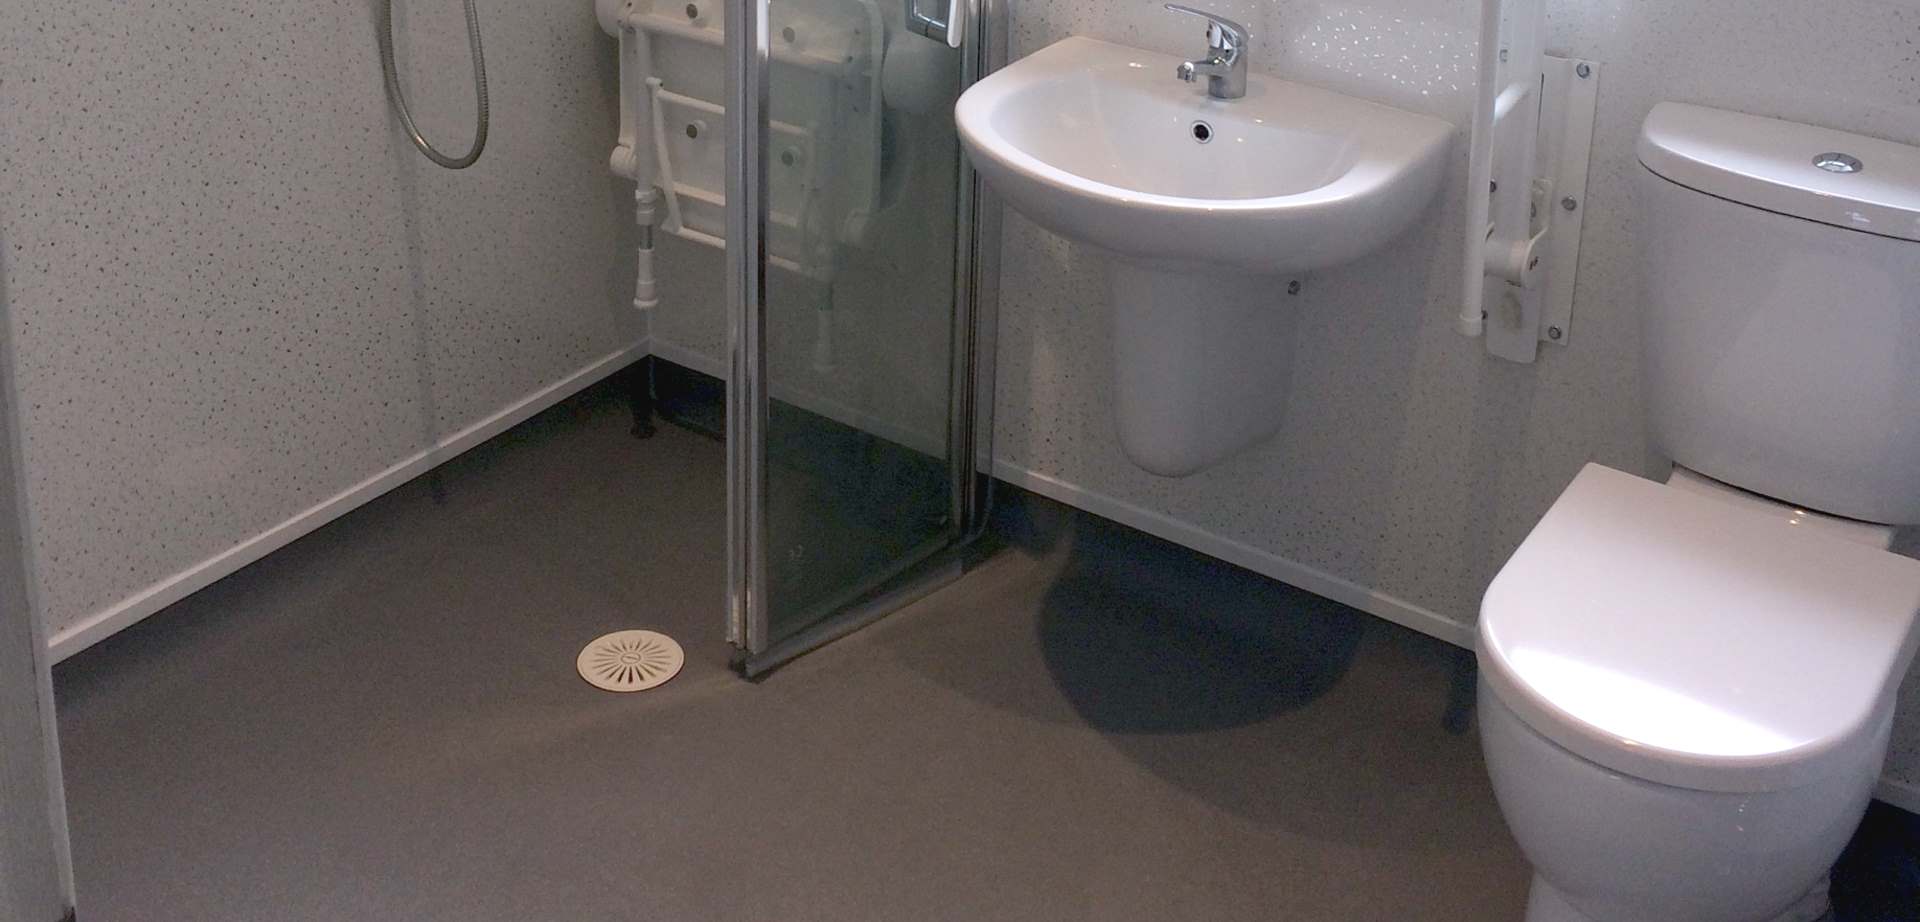 Wetroom Installers in Nottingham and The Midlands